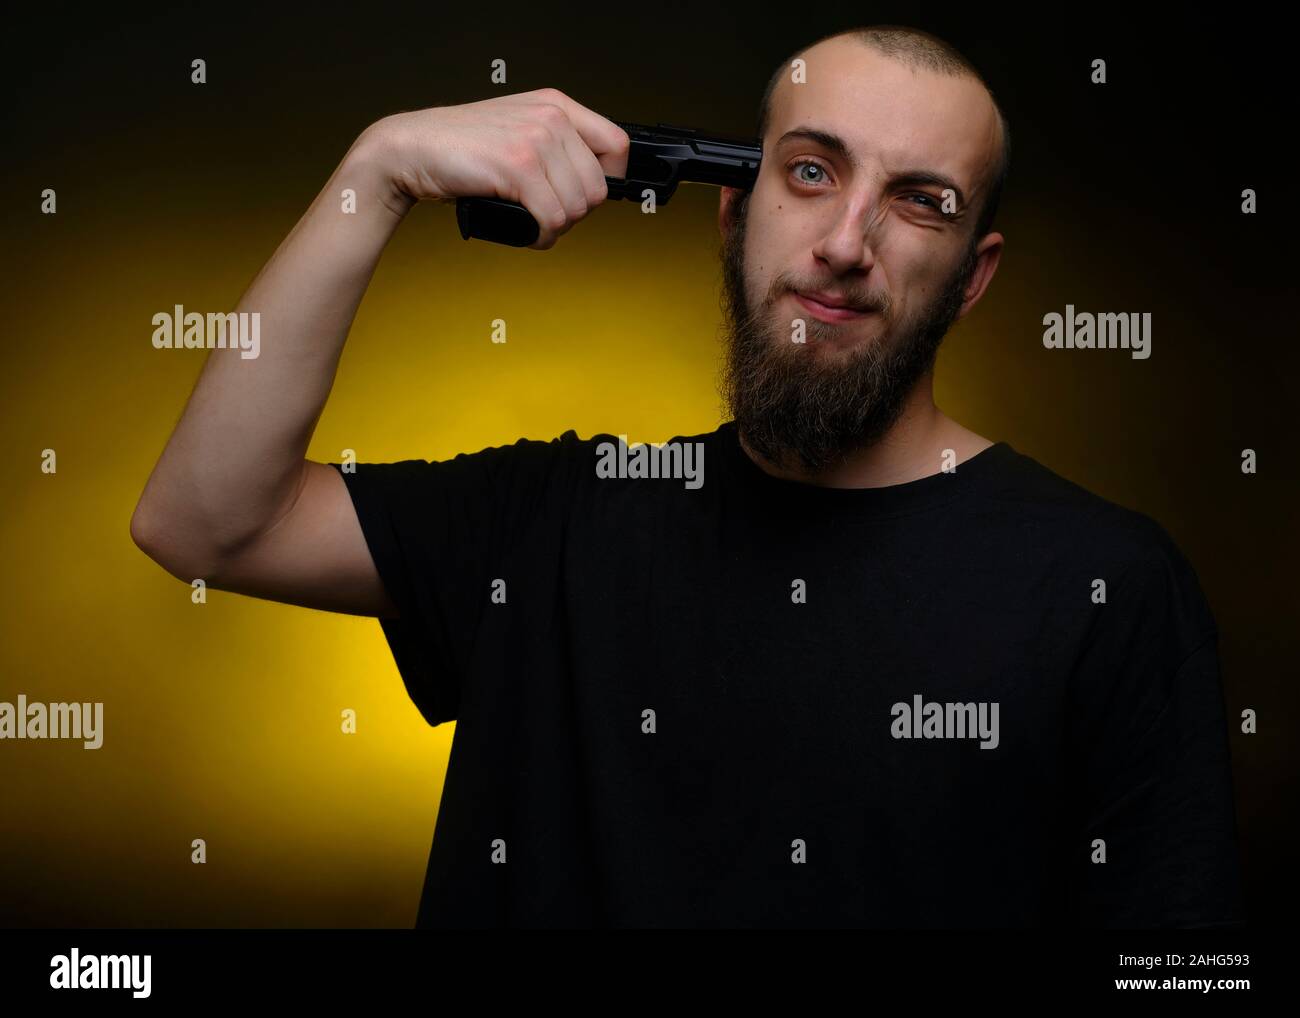 Portrait of a young man pointing a gun to his head. Shot against dark and yellow background Stock Photo